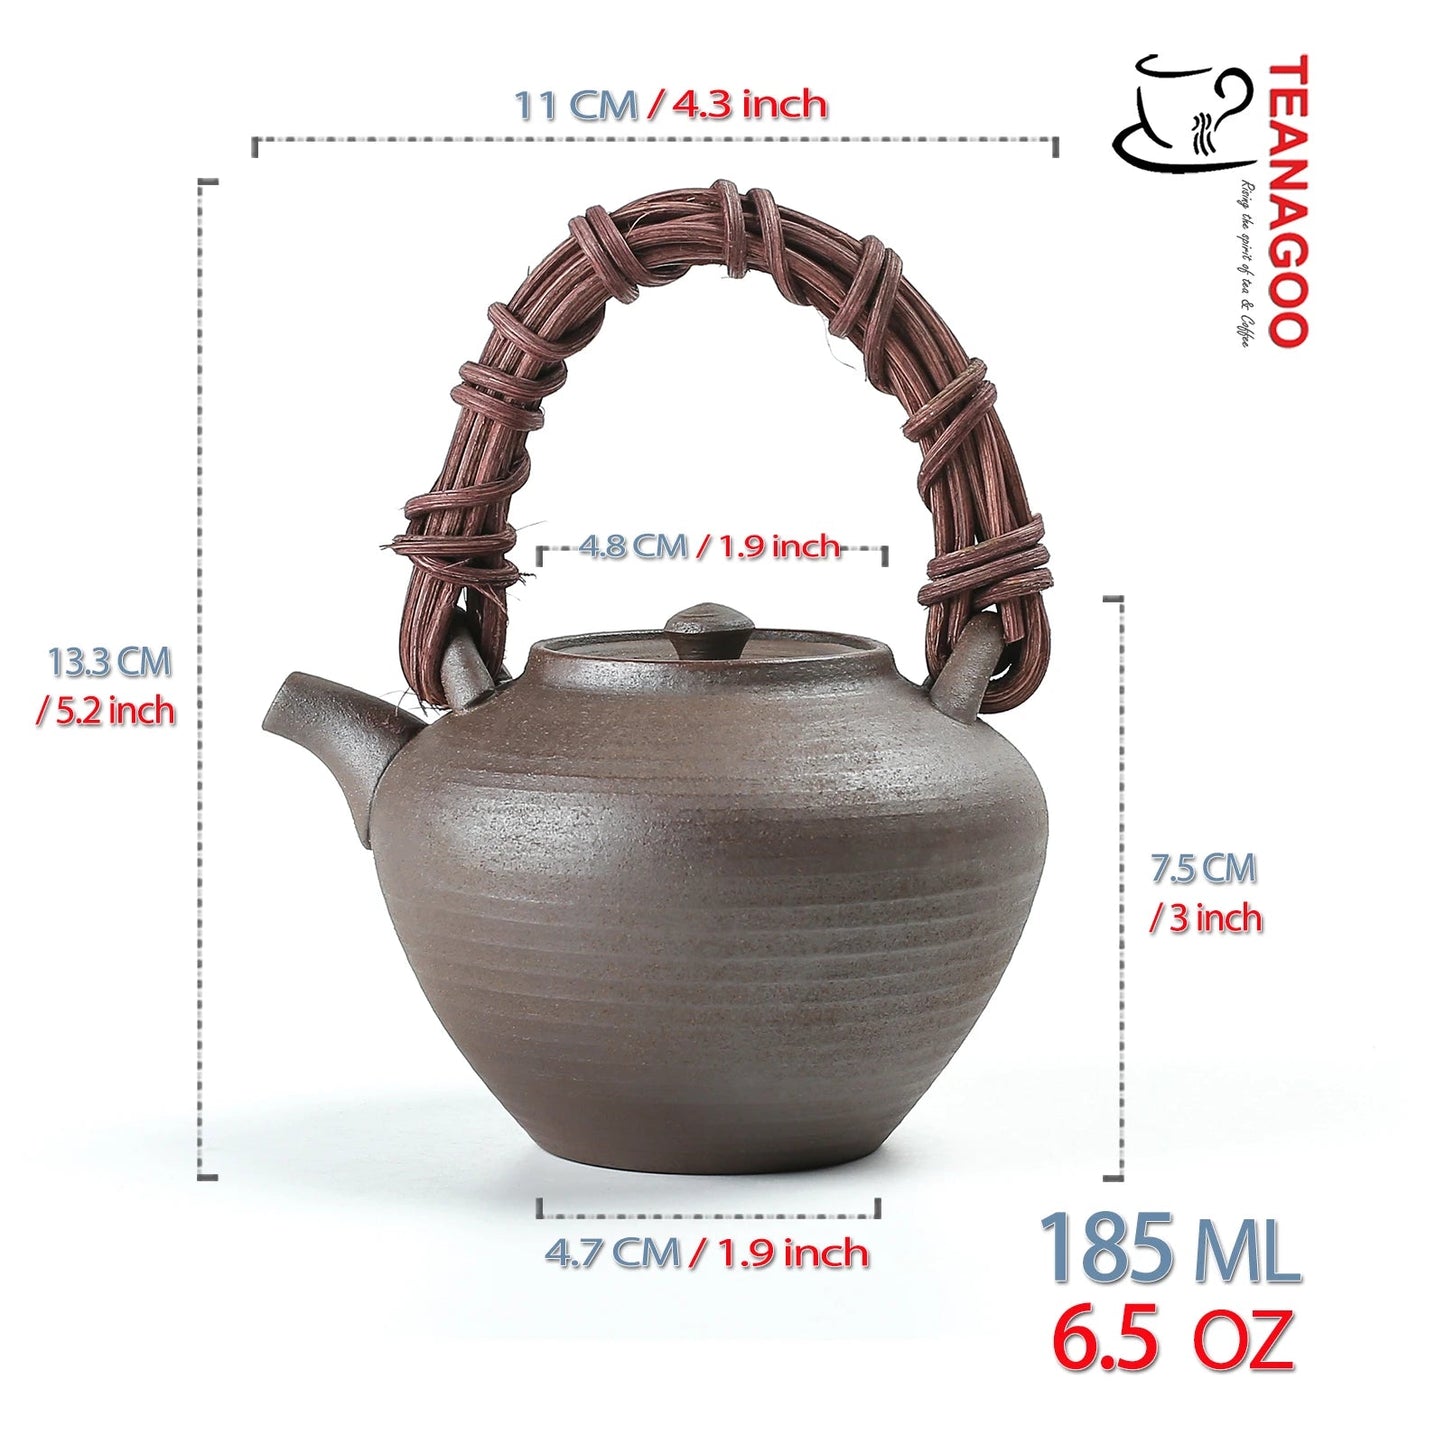 Handcrafted Pottery Clay Teapot 185ml Ceramic Tea Accessory